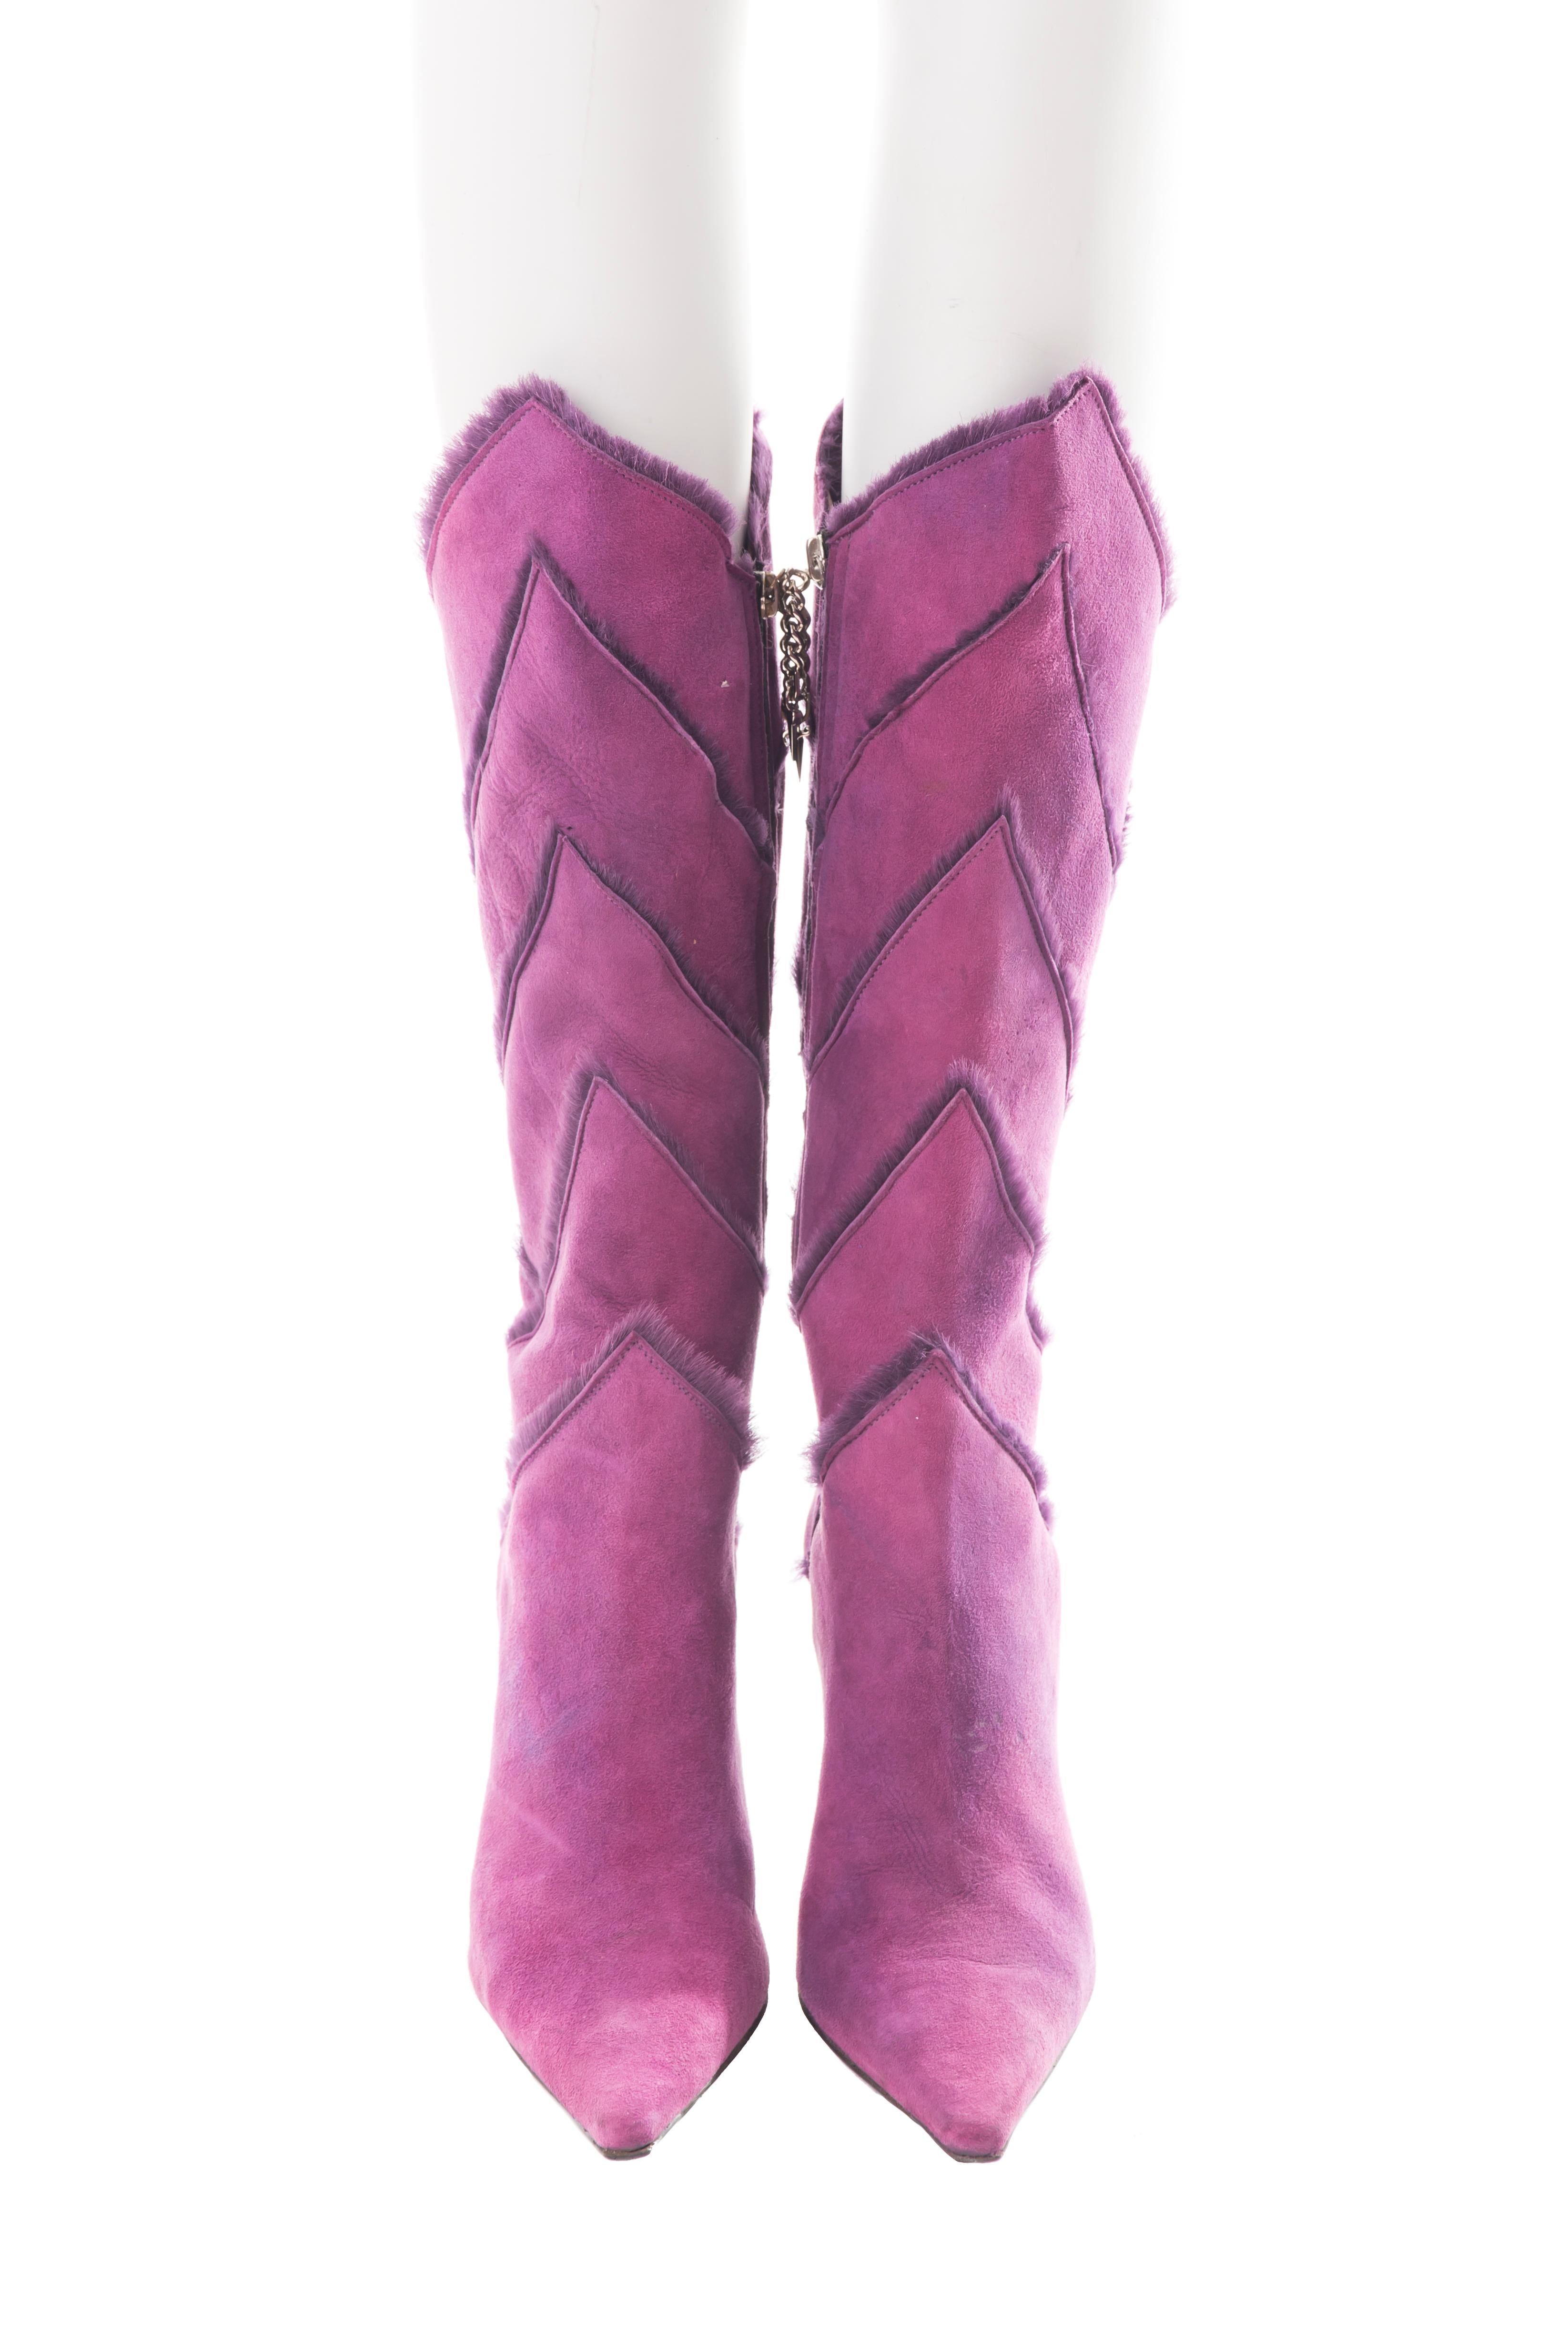 - Cesare Paciotti boots
- Sold by Gold Palms Vintage
- Fall/Winter 2002
- Purple distressed suede with real fur lining
- Pointed toe
- Size EU 38,5 / US 7.5
